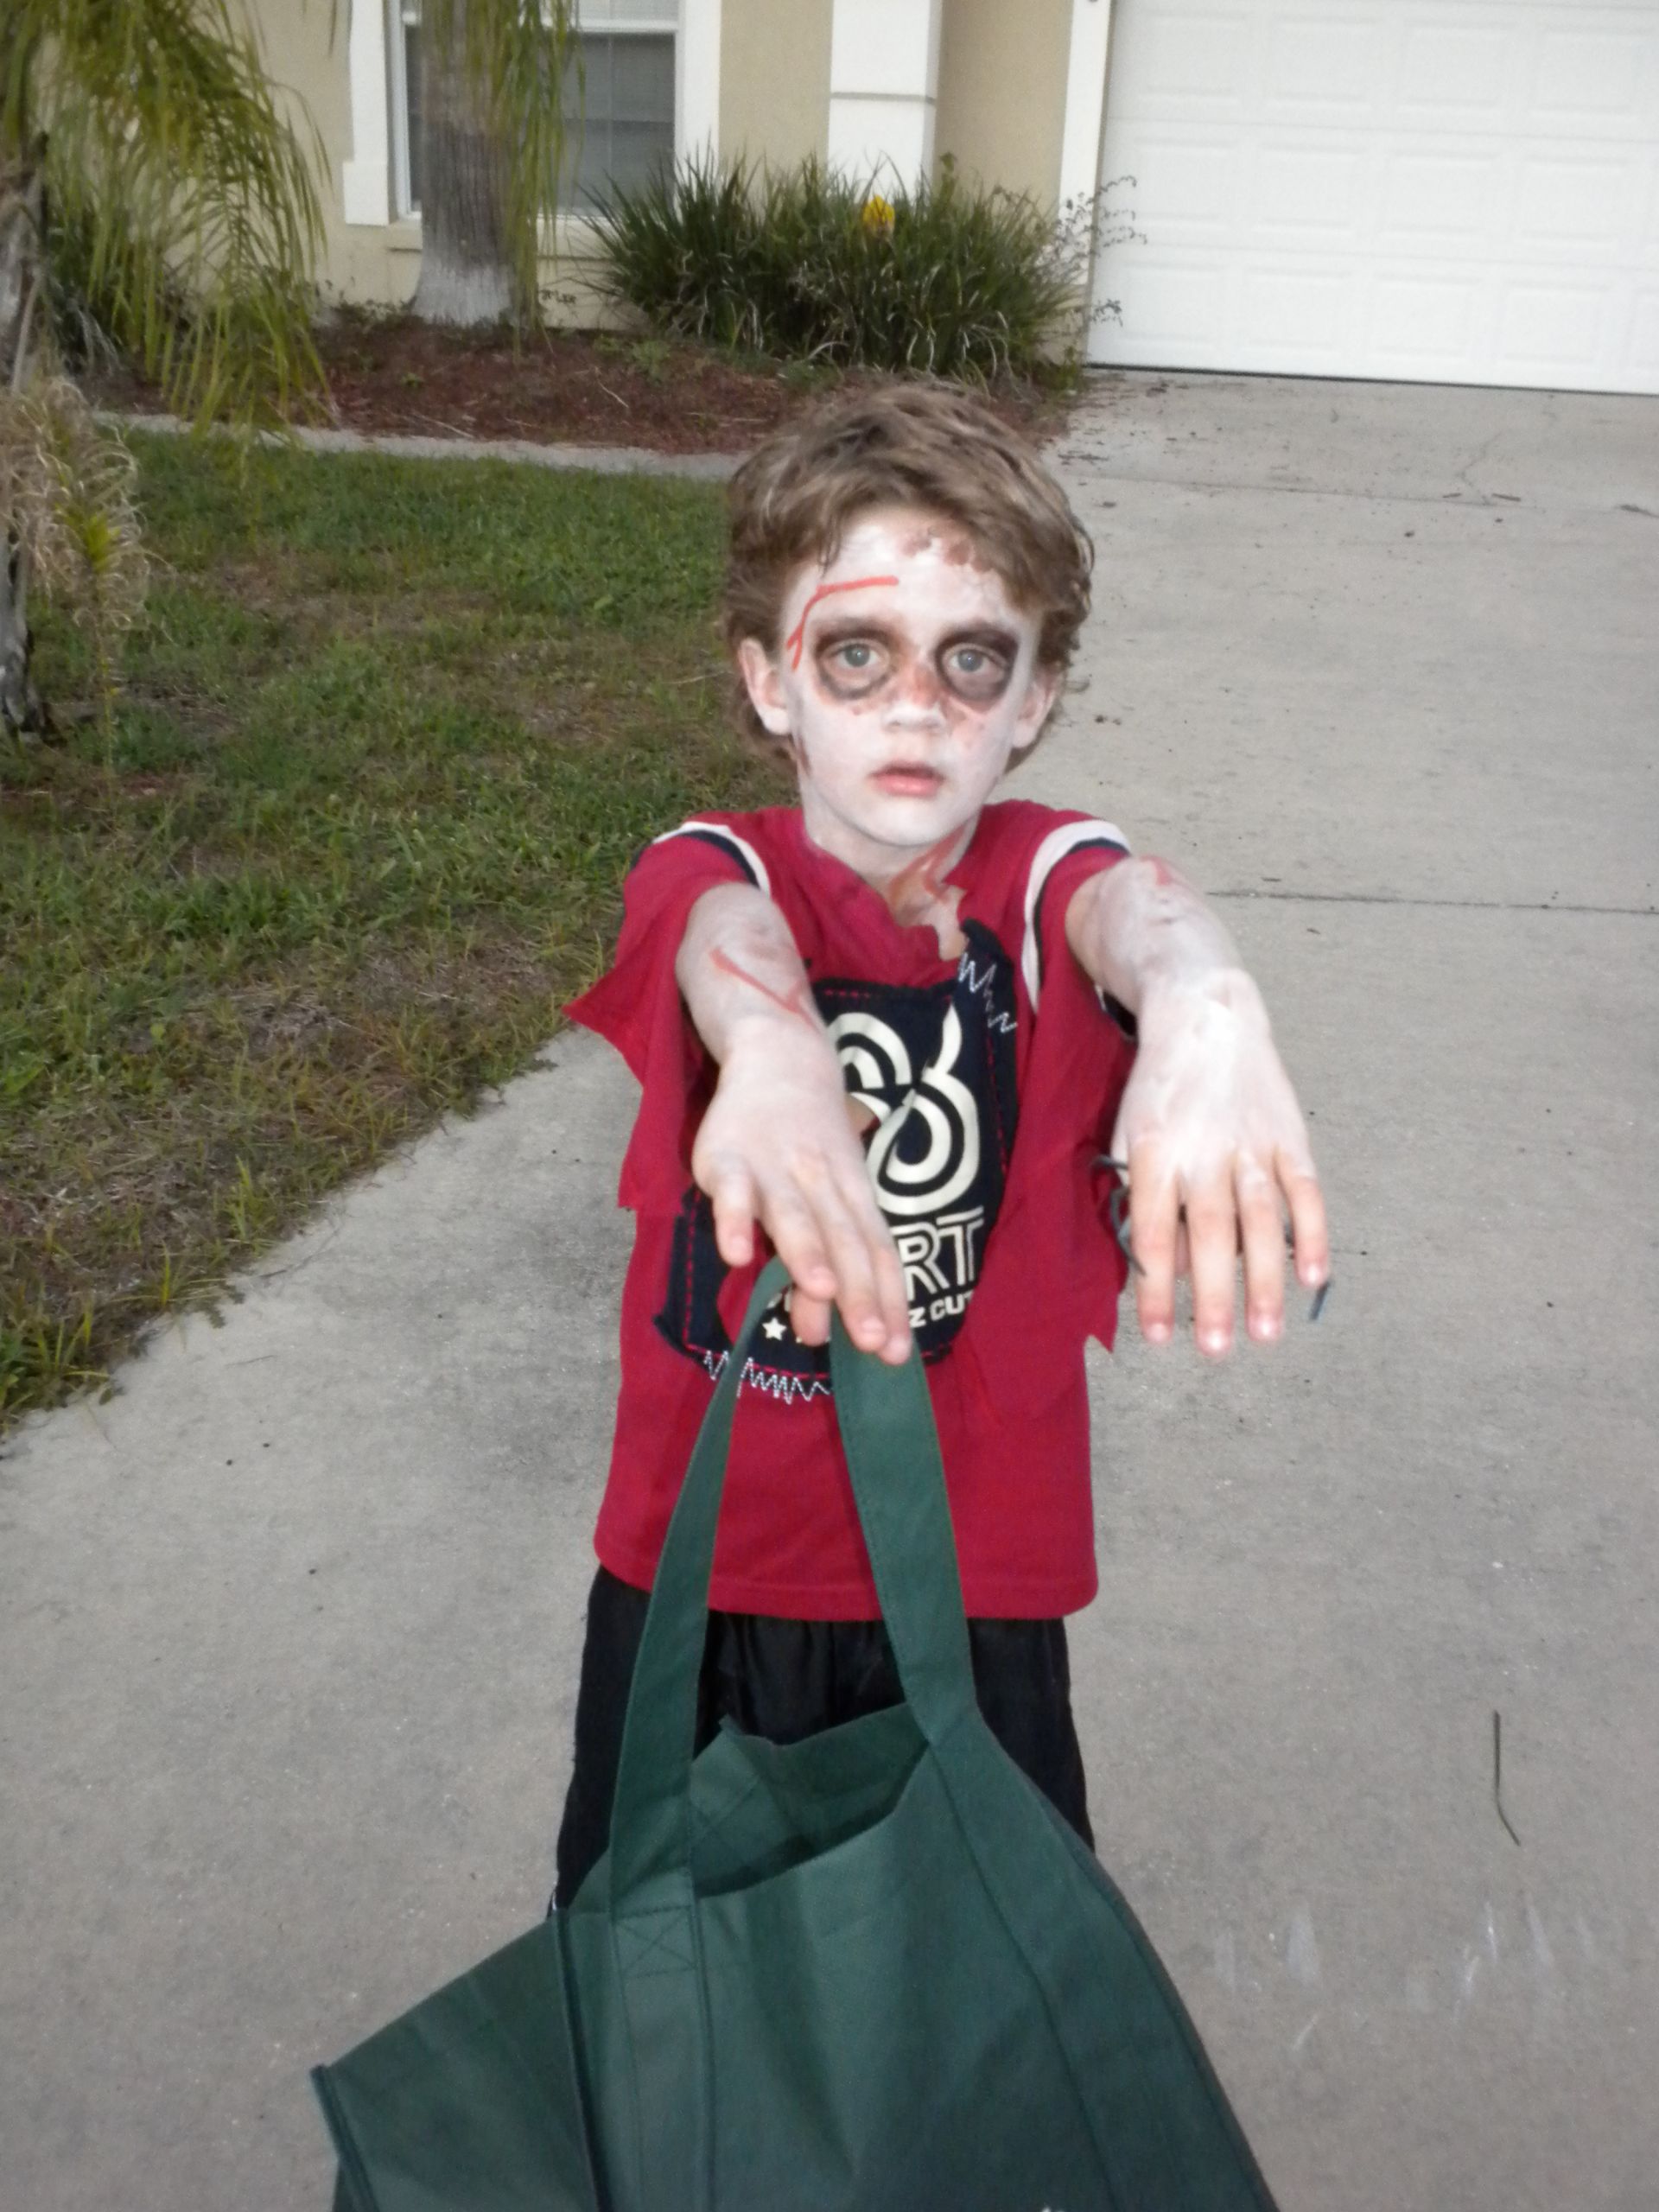 Diy Child Zombie Costume
 301 Moved Permanently